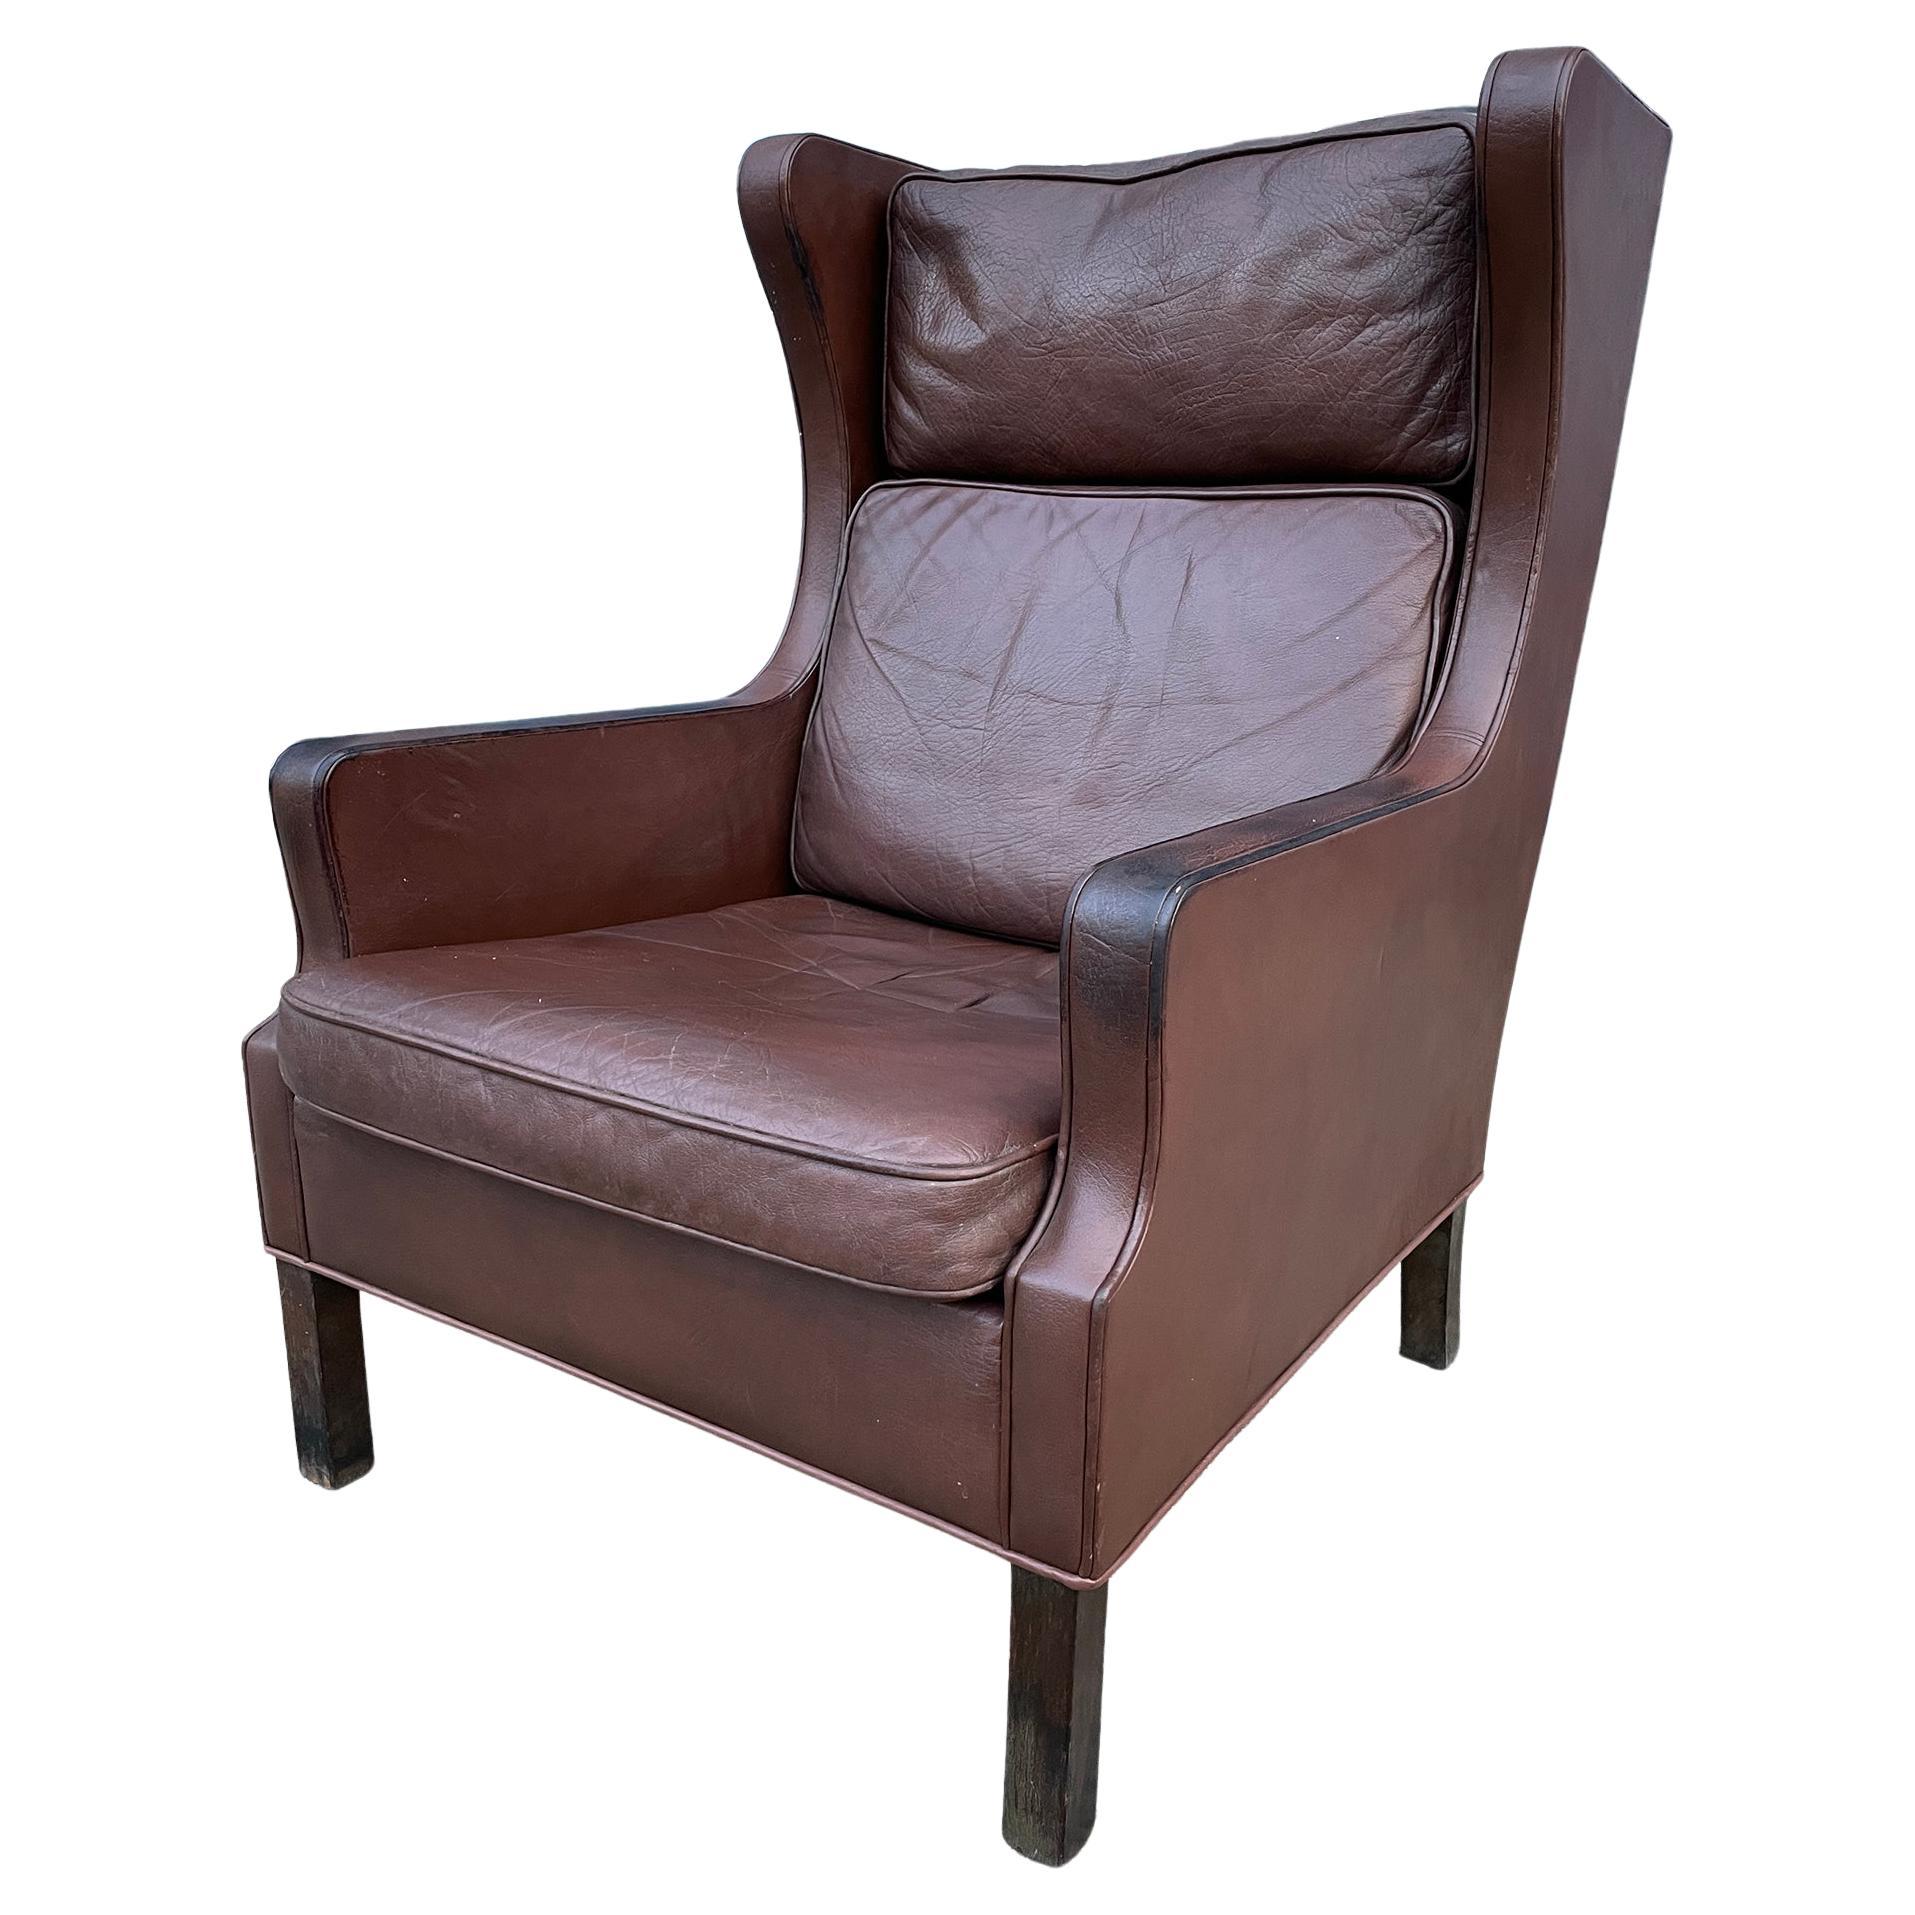 Midcentury Danish Modern Wingback Leather Chair by Børge Mogensen For Sale